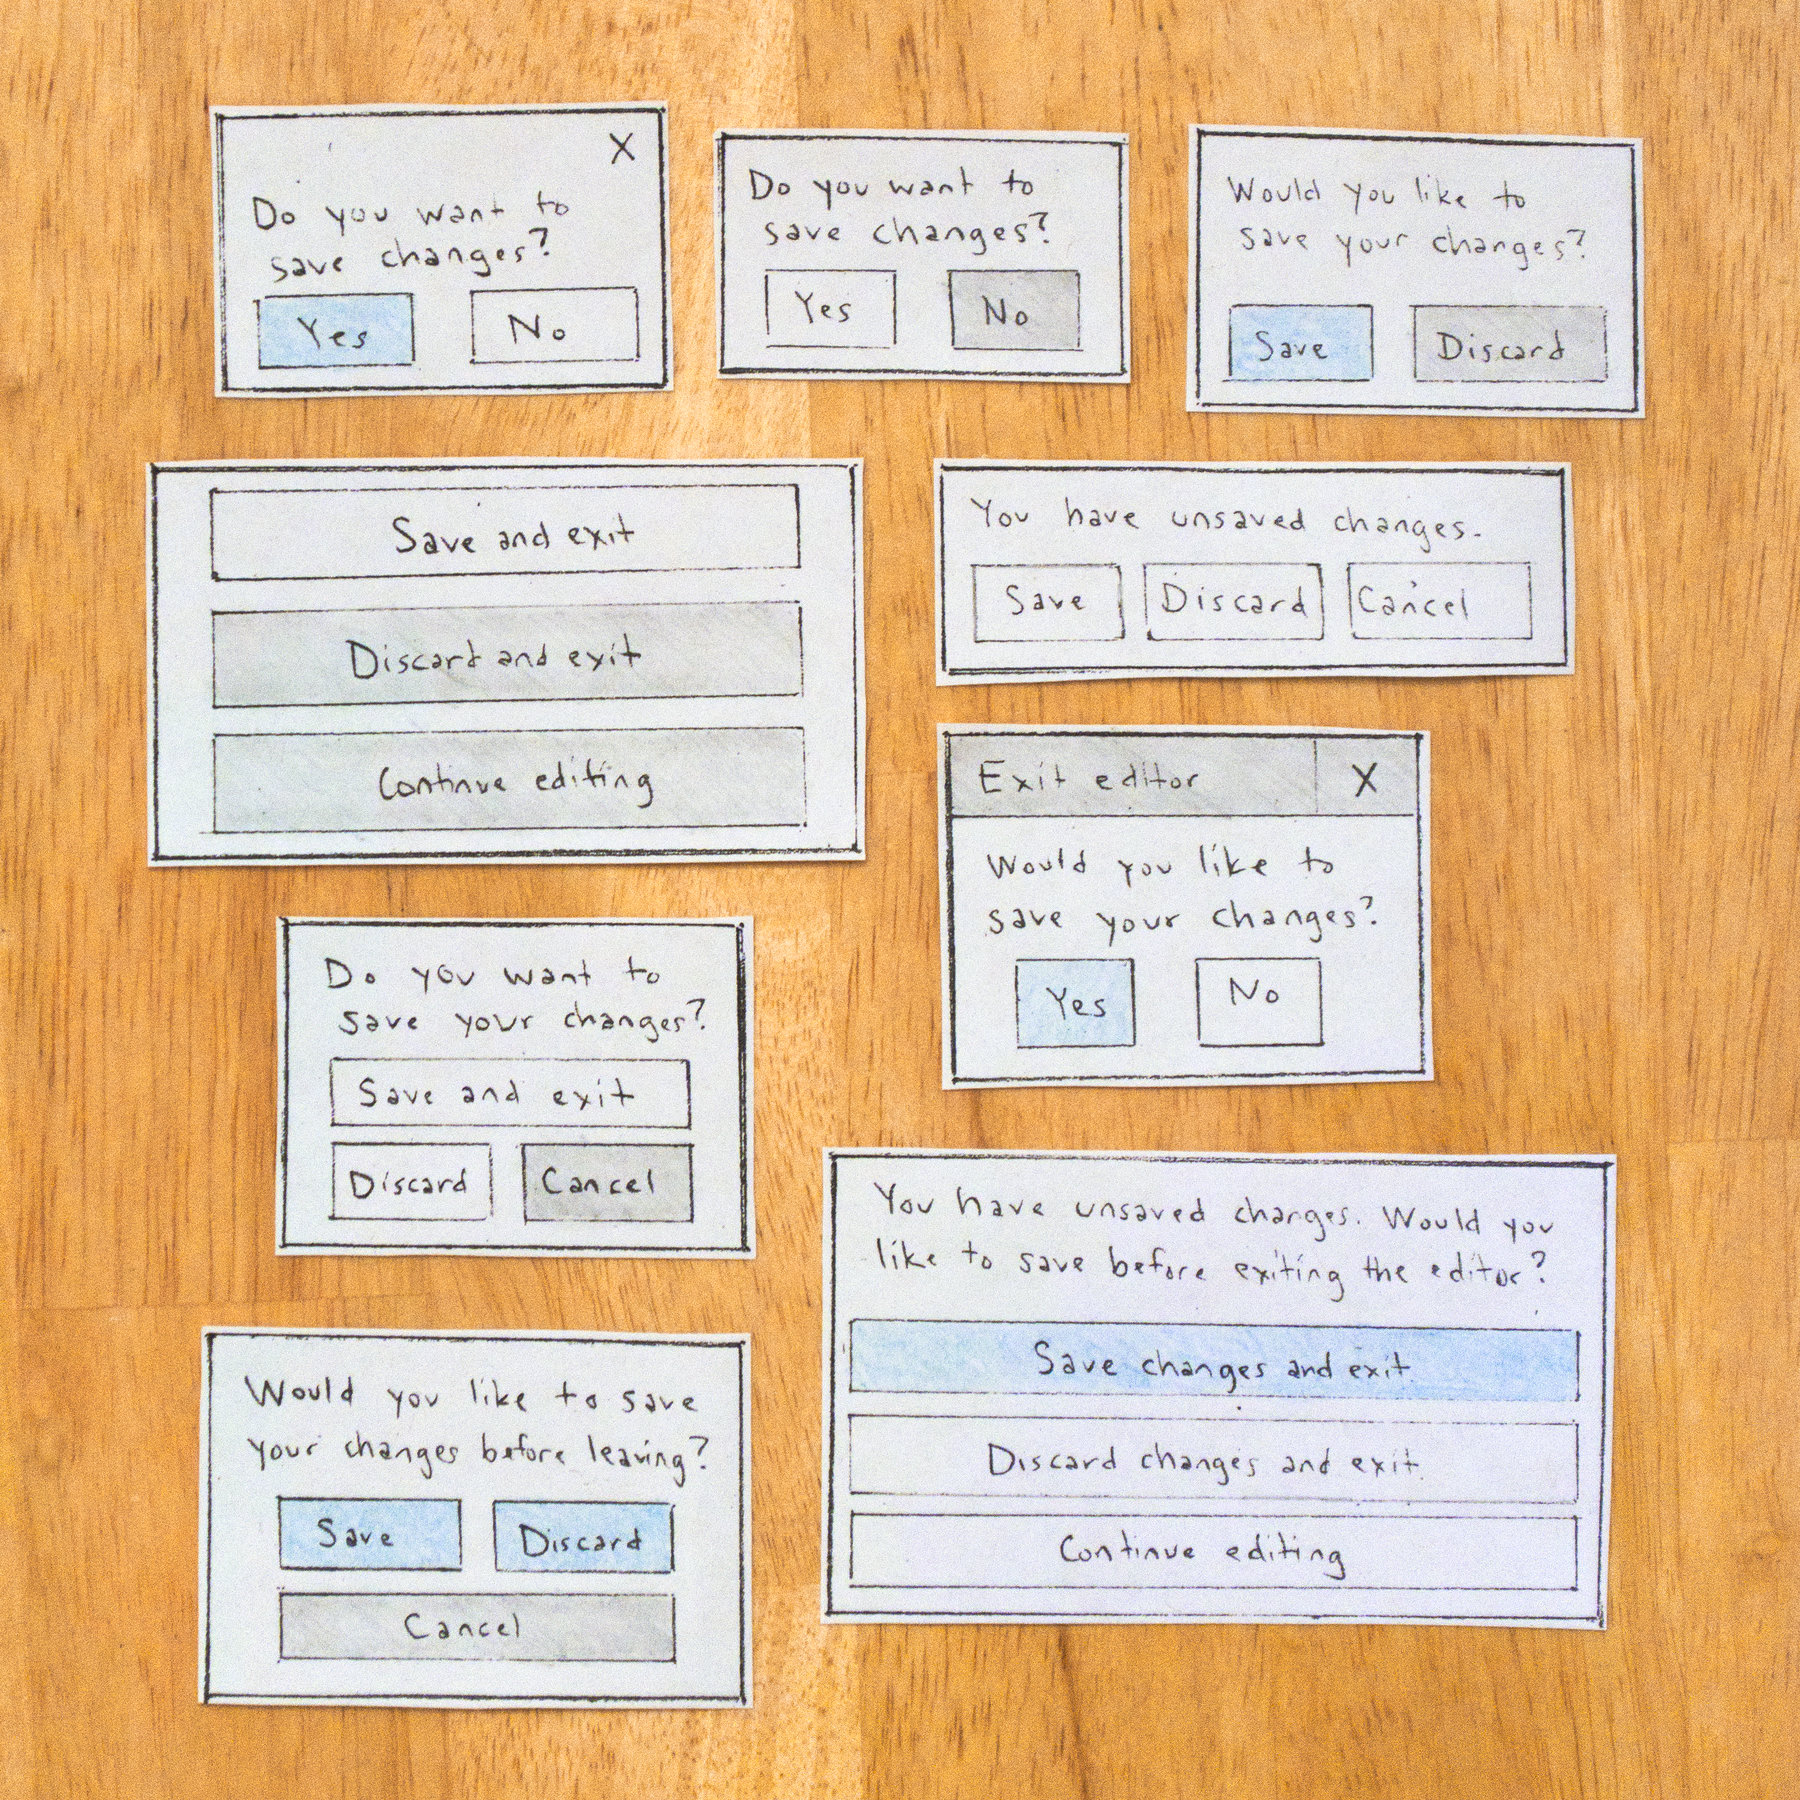 Sketches of 9 variations for a dialog box.              The microcopy varies from 'Yes' and 'No' to 'Save and exit' or 'Continue editing'